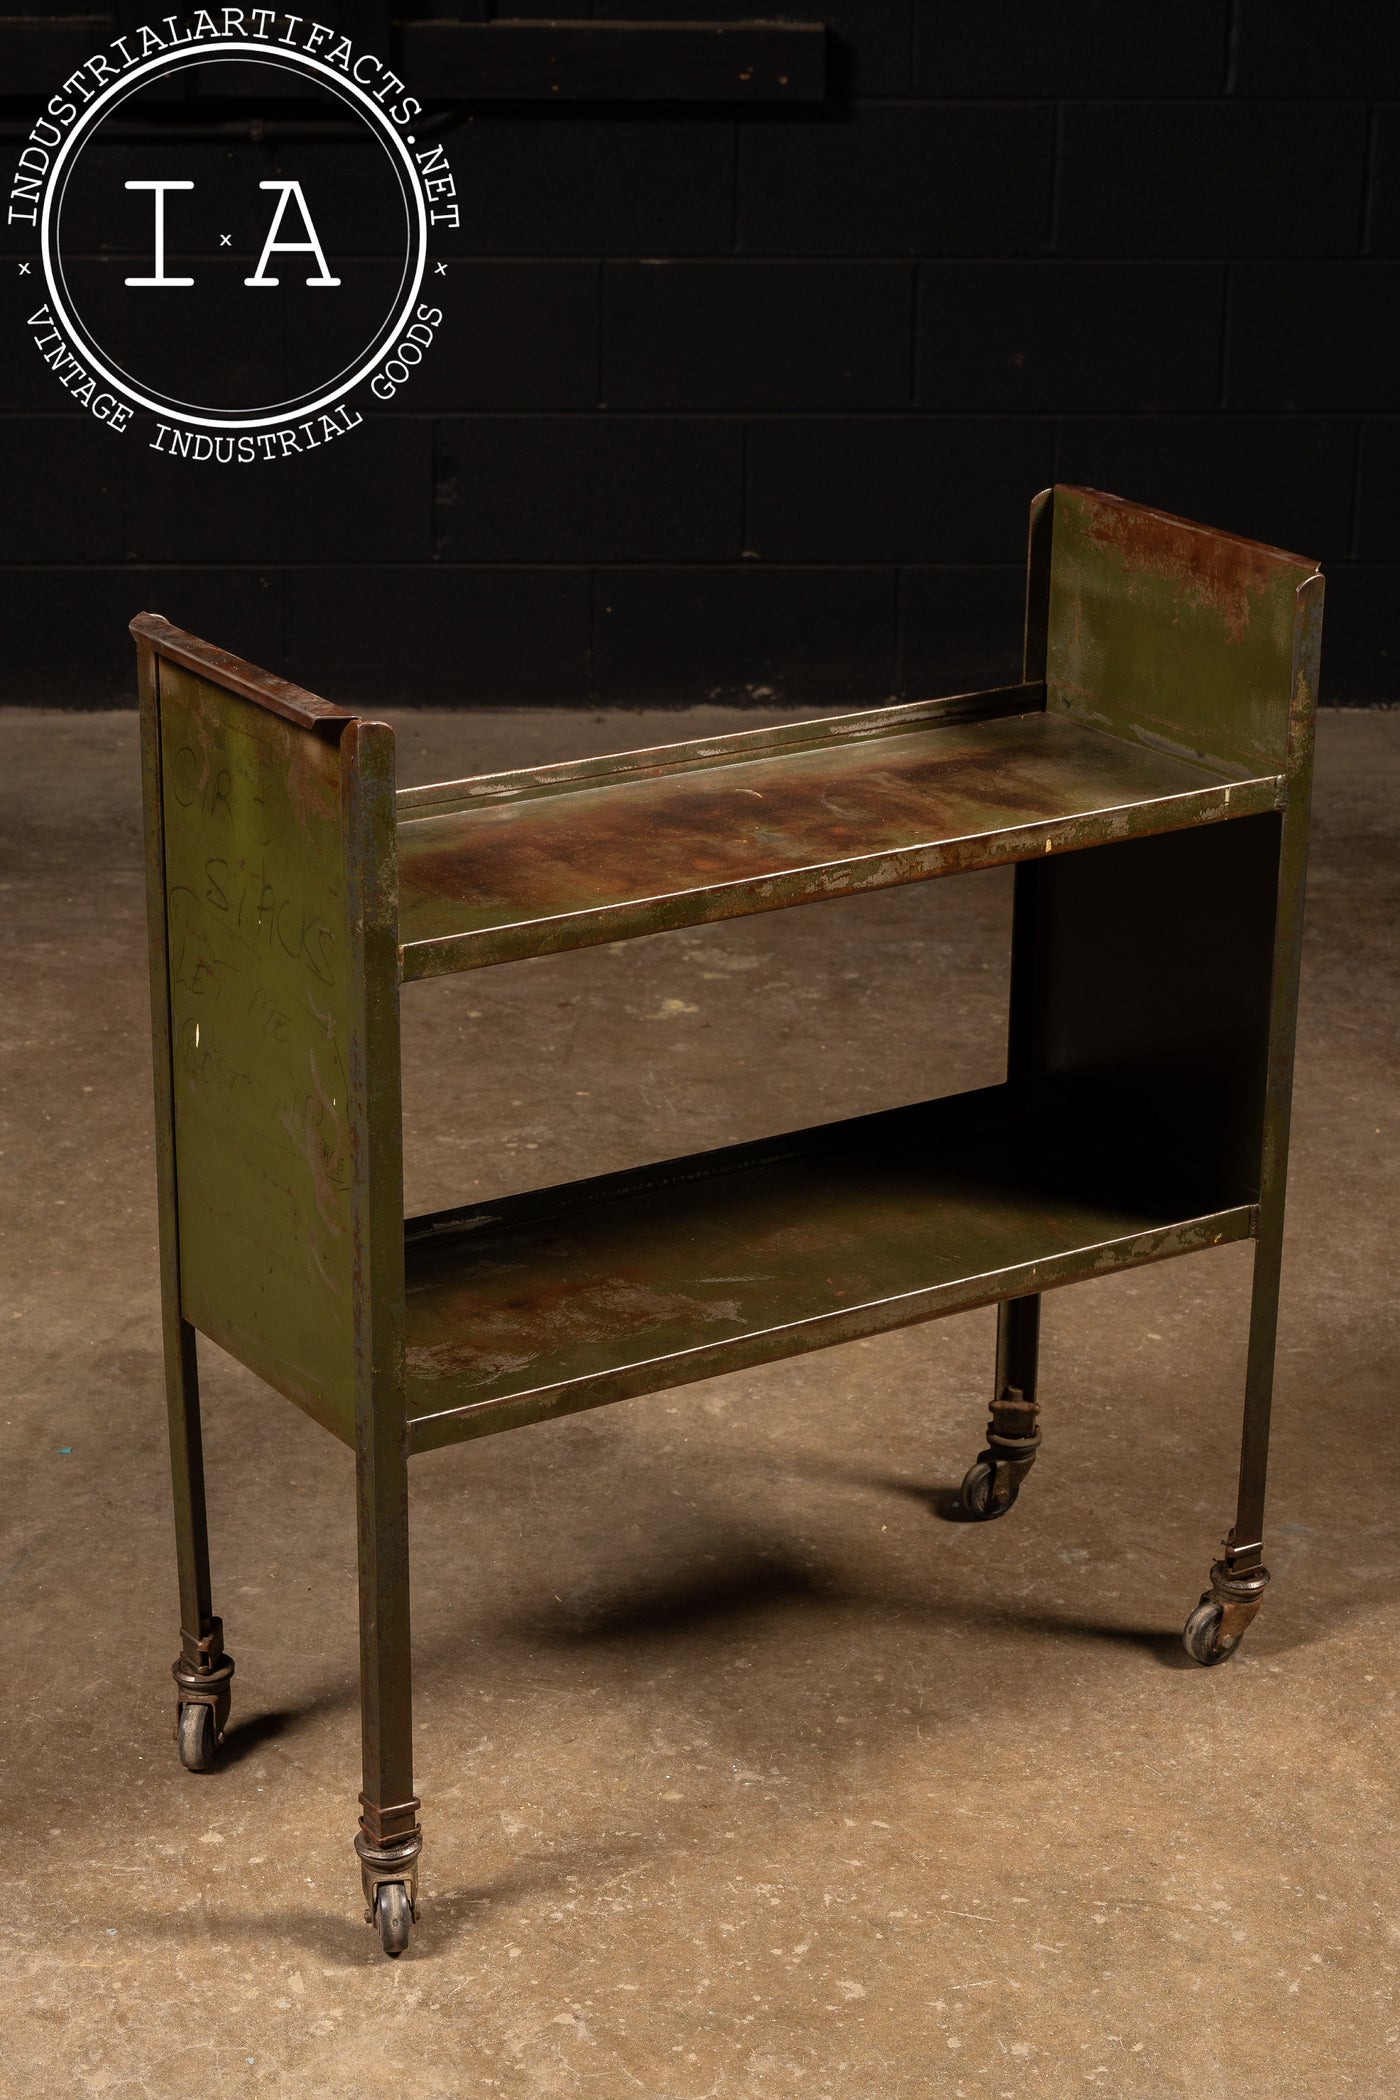 Antique Library Cart